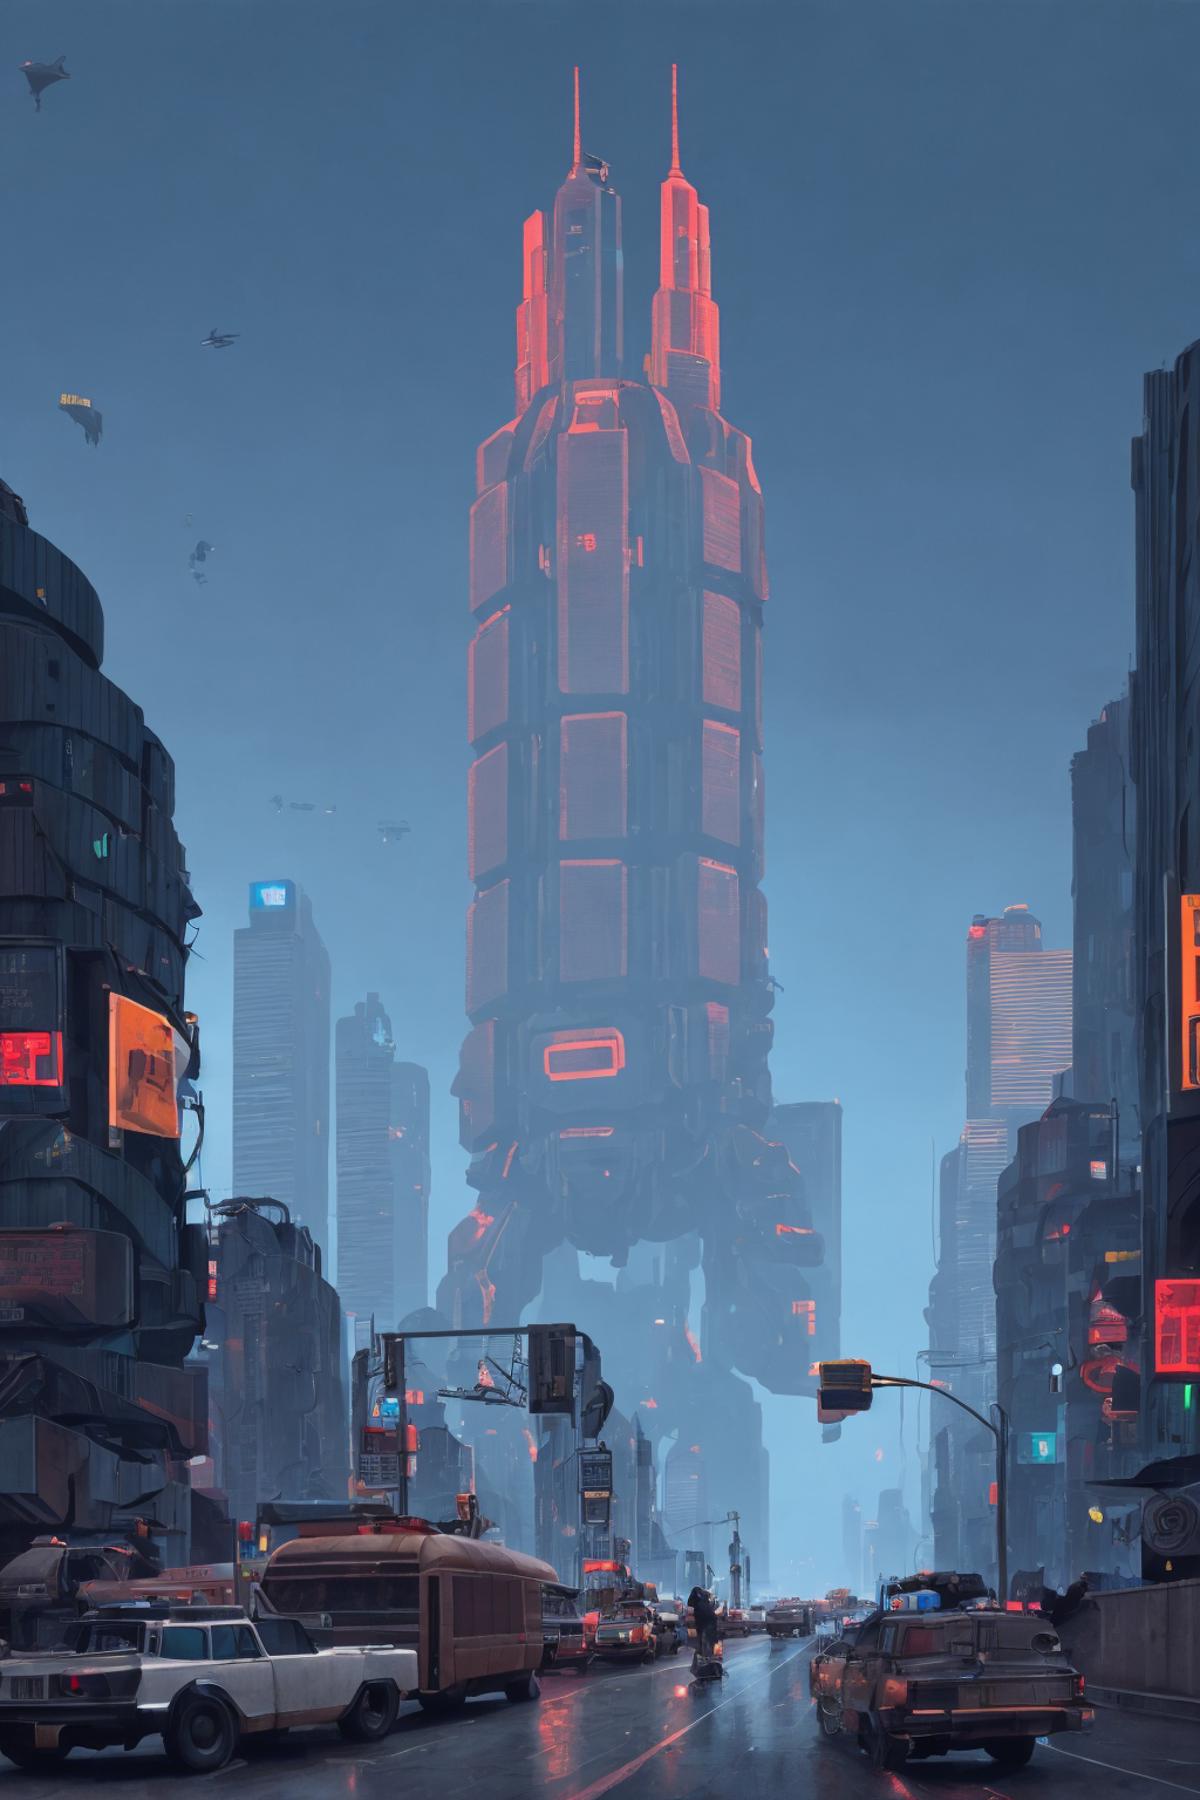 Futuristic Cityscape with Neon Lights and Giant Tower at Night